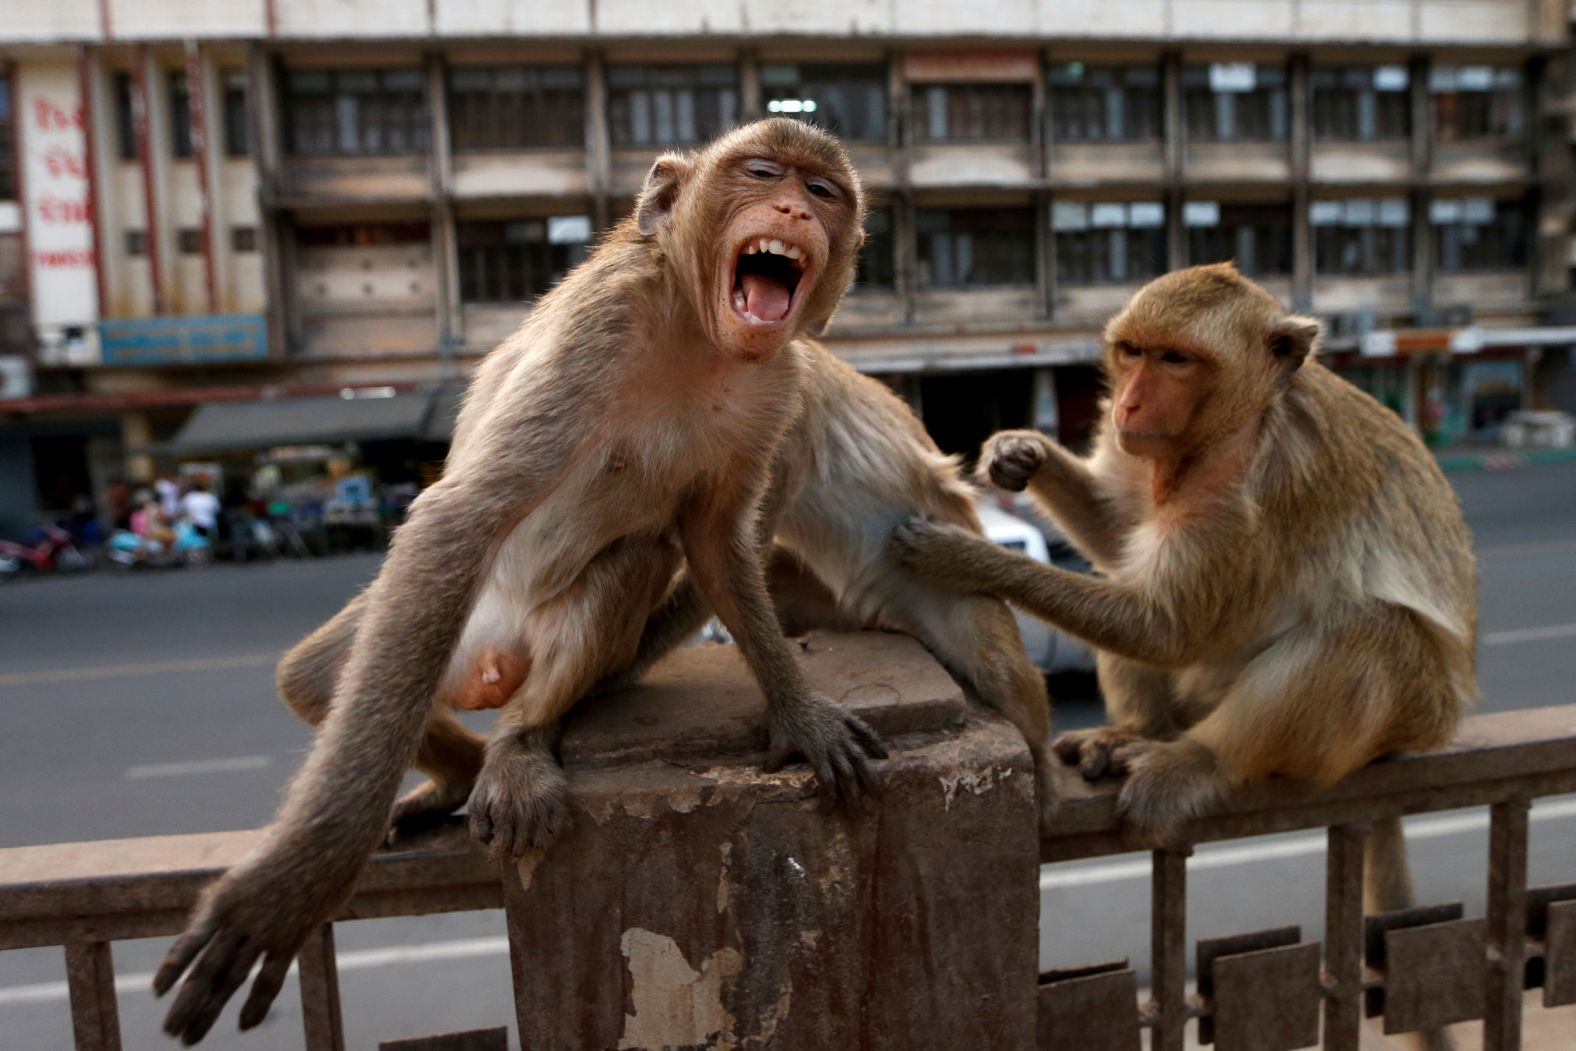 Monkeys are seen near the Prang Sam Yod temple in Lopburi, Thailand, on March 17. The monkeys live at the temple and interact with tourists, but a recent monkey brawl <a href="index.php?page=&url=https%3A%2F%2Fwww.facebook.com%2F1733840675%2Fvideos%2F10206801064741888%2F" target="_blank" target="_blank">caught on video </a>might suggest that resources are now scarce, <a href="index.php?page=&url=https%3A%2F%2Fwww.nytimes.com%2F2020%2F03%2F16%2Fscience%2Fhungry-monkeys-deer-coronavirus.html" target="_blank" target="_blank">ecologist Asmita Sengupta told The New York Times.</a>